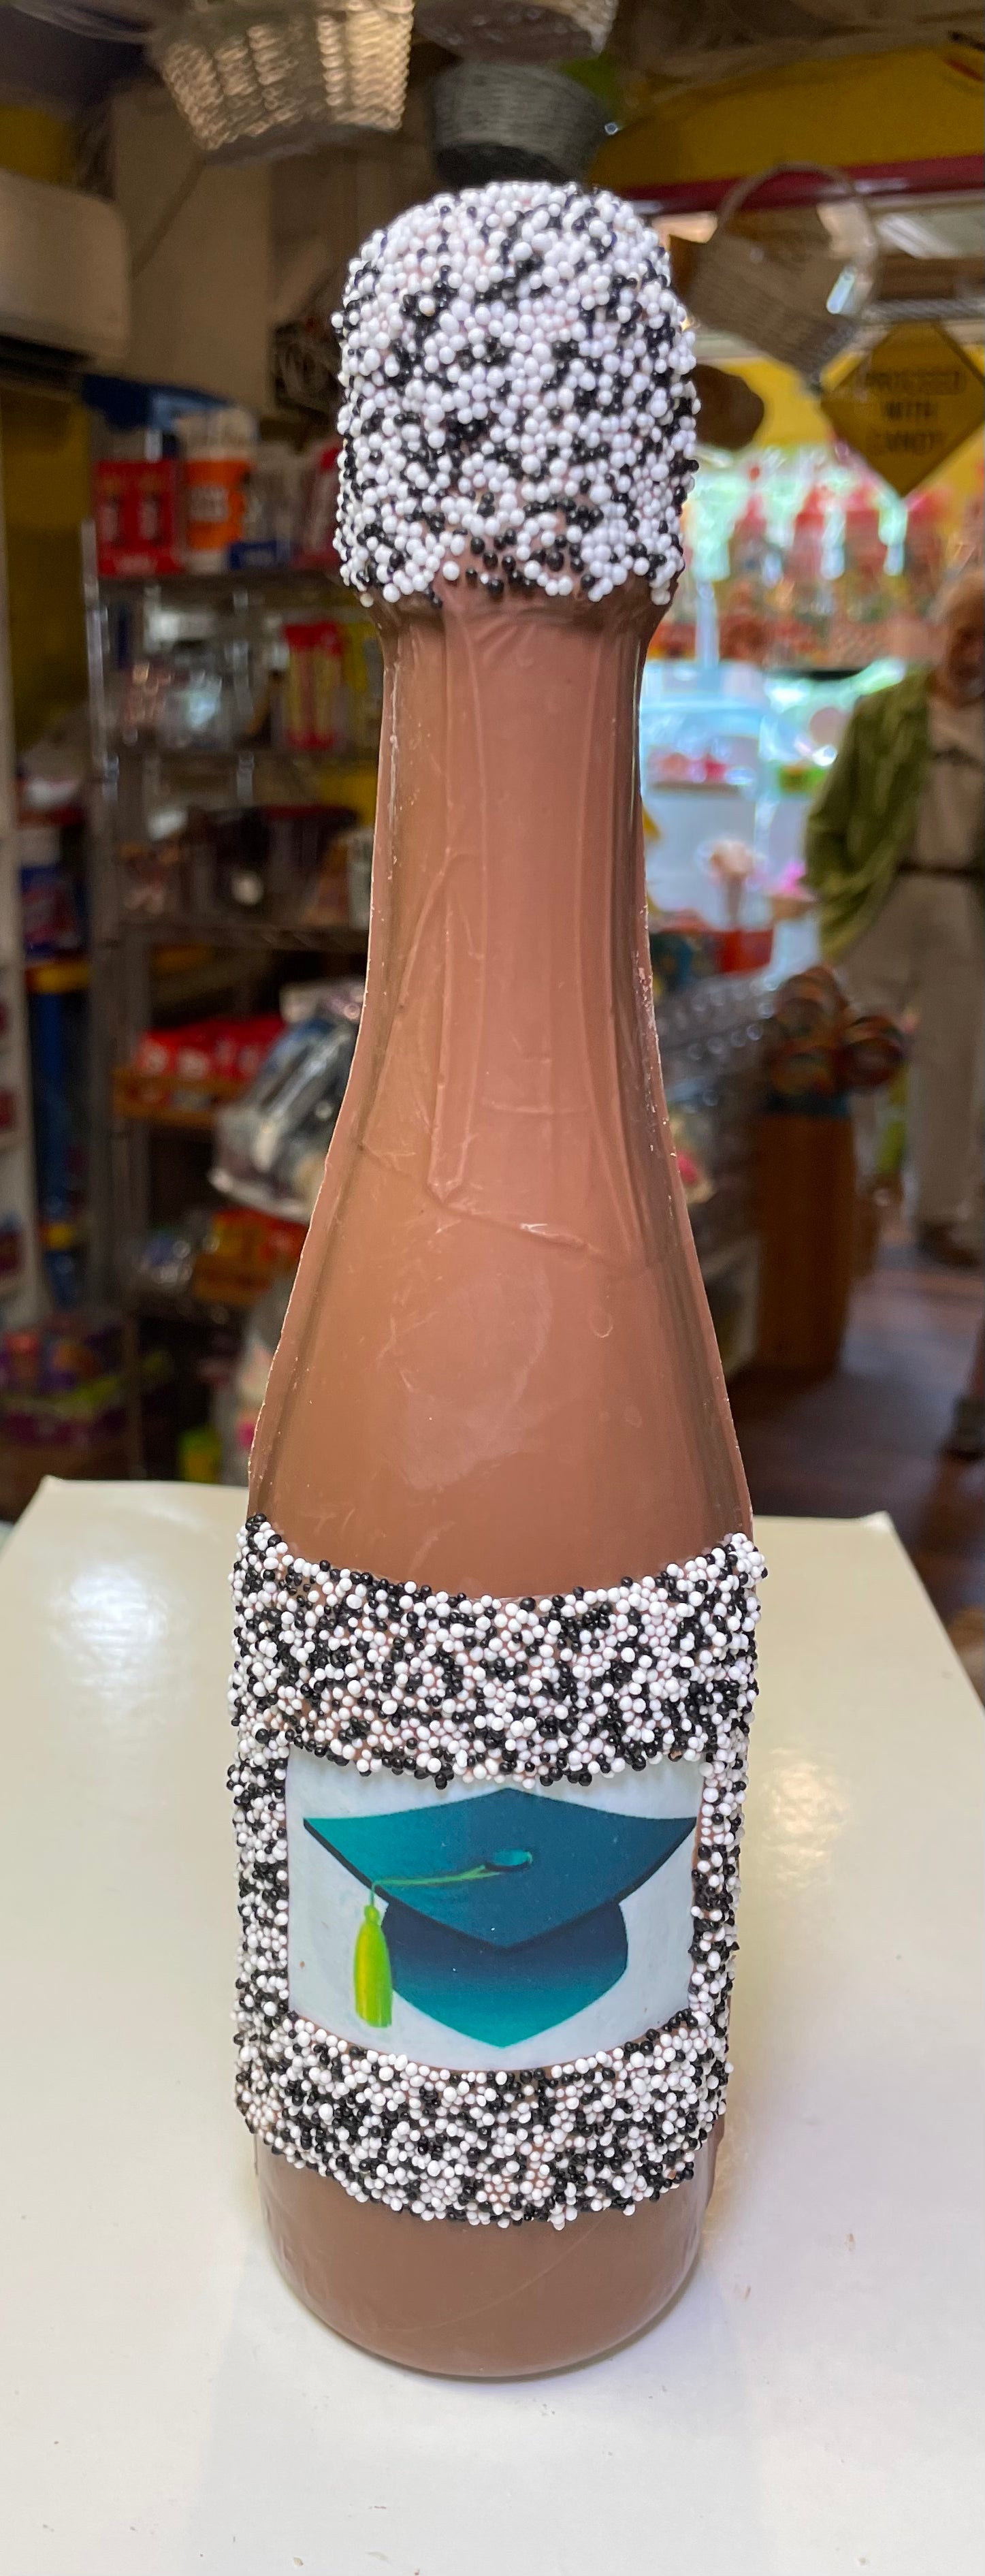 Custom Chocolate Champagne Bottle Chocolate gift Sweeties Candy Cottage   